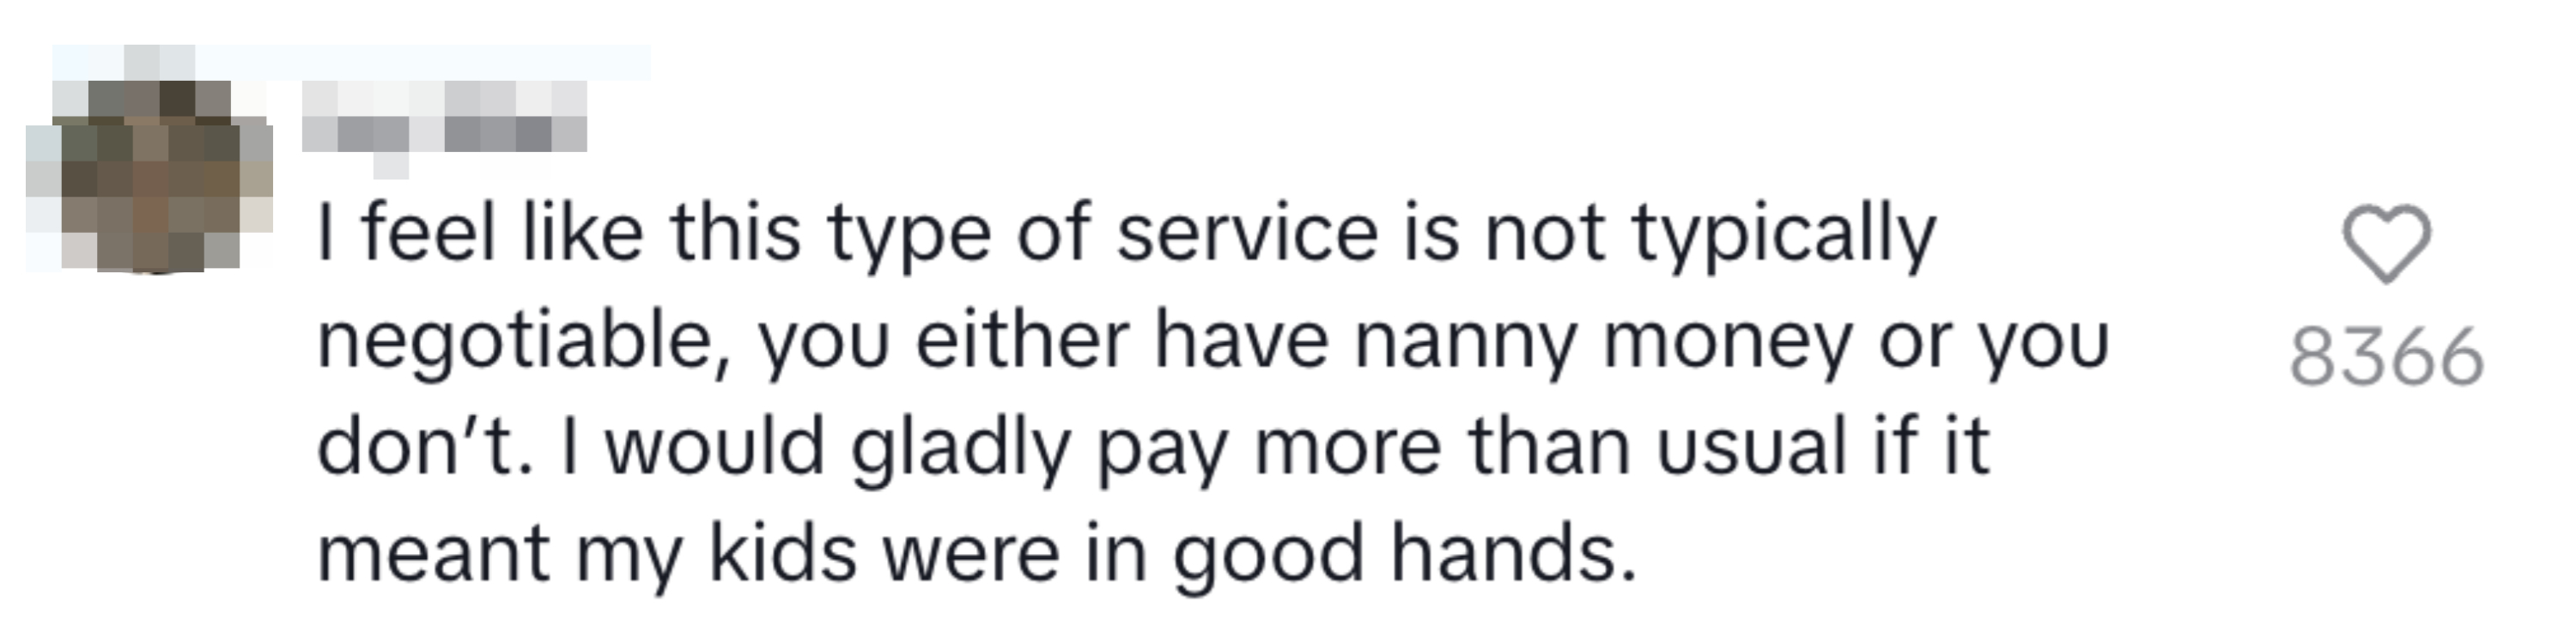 Instagram post expressing willingness to pay more for good nanny services, with likes shown